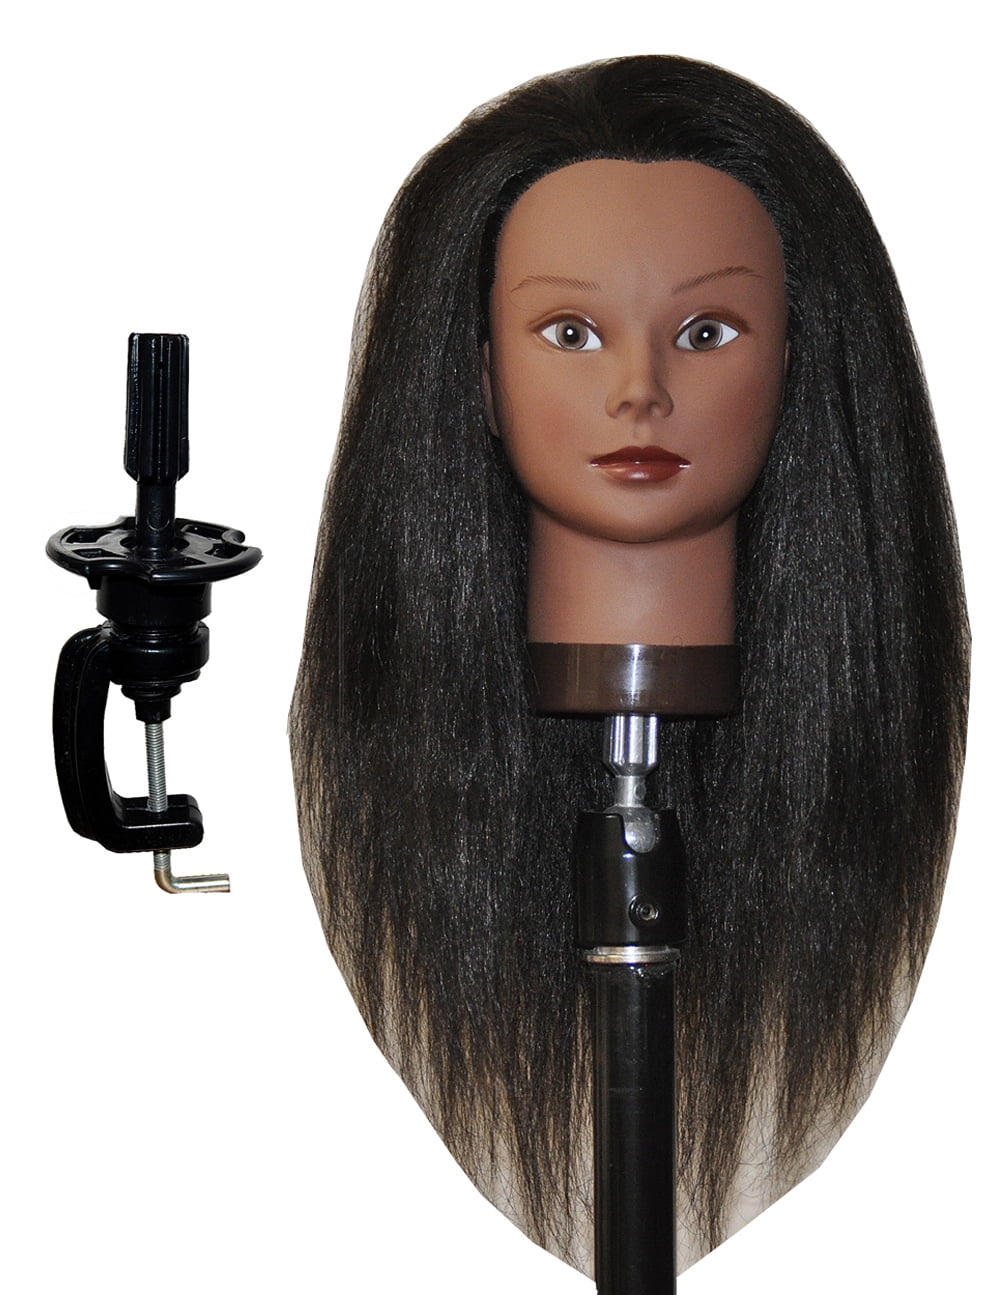 Afro Curly Mannequin Head 100% Human Hair Training Head Manikin Hairdresser  Cosmetology Mannequin Doll Head Manikin Training Head for Practice Styling  Braiding Dolls Head African American Curly Hair Head with Clamp Stand 9…